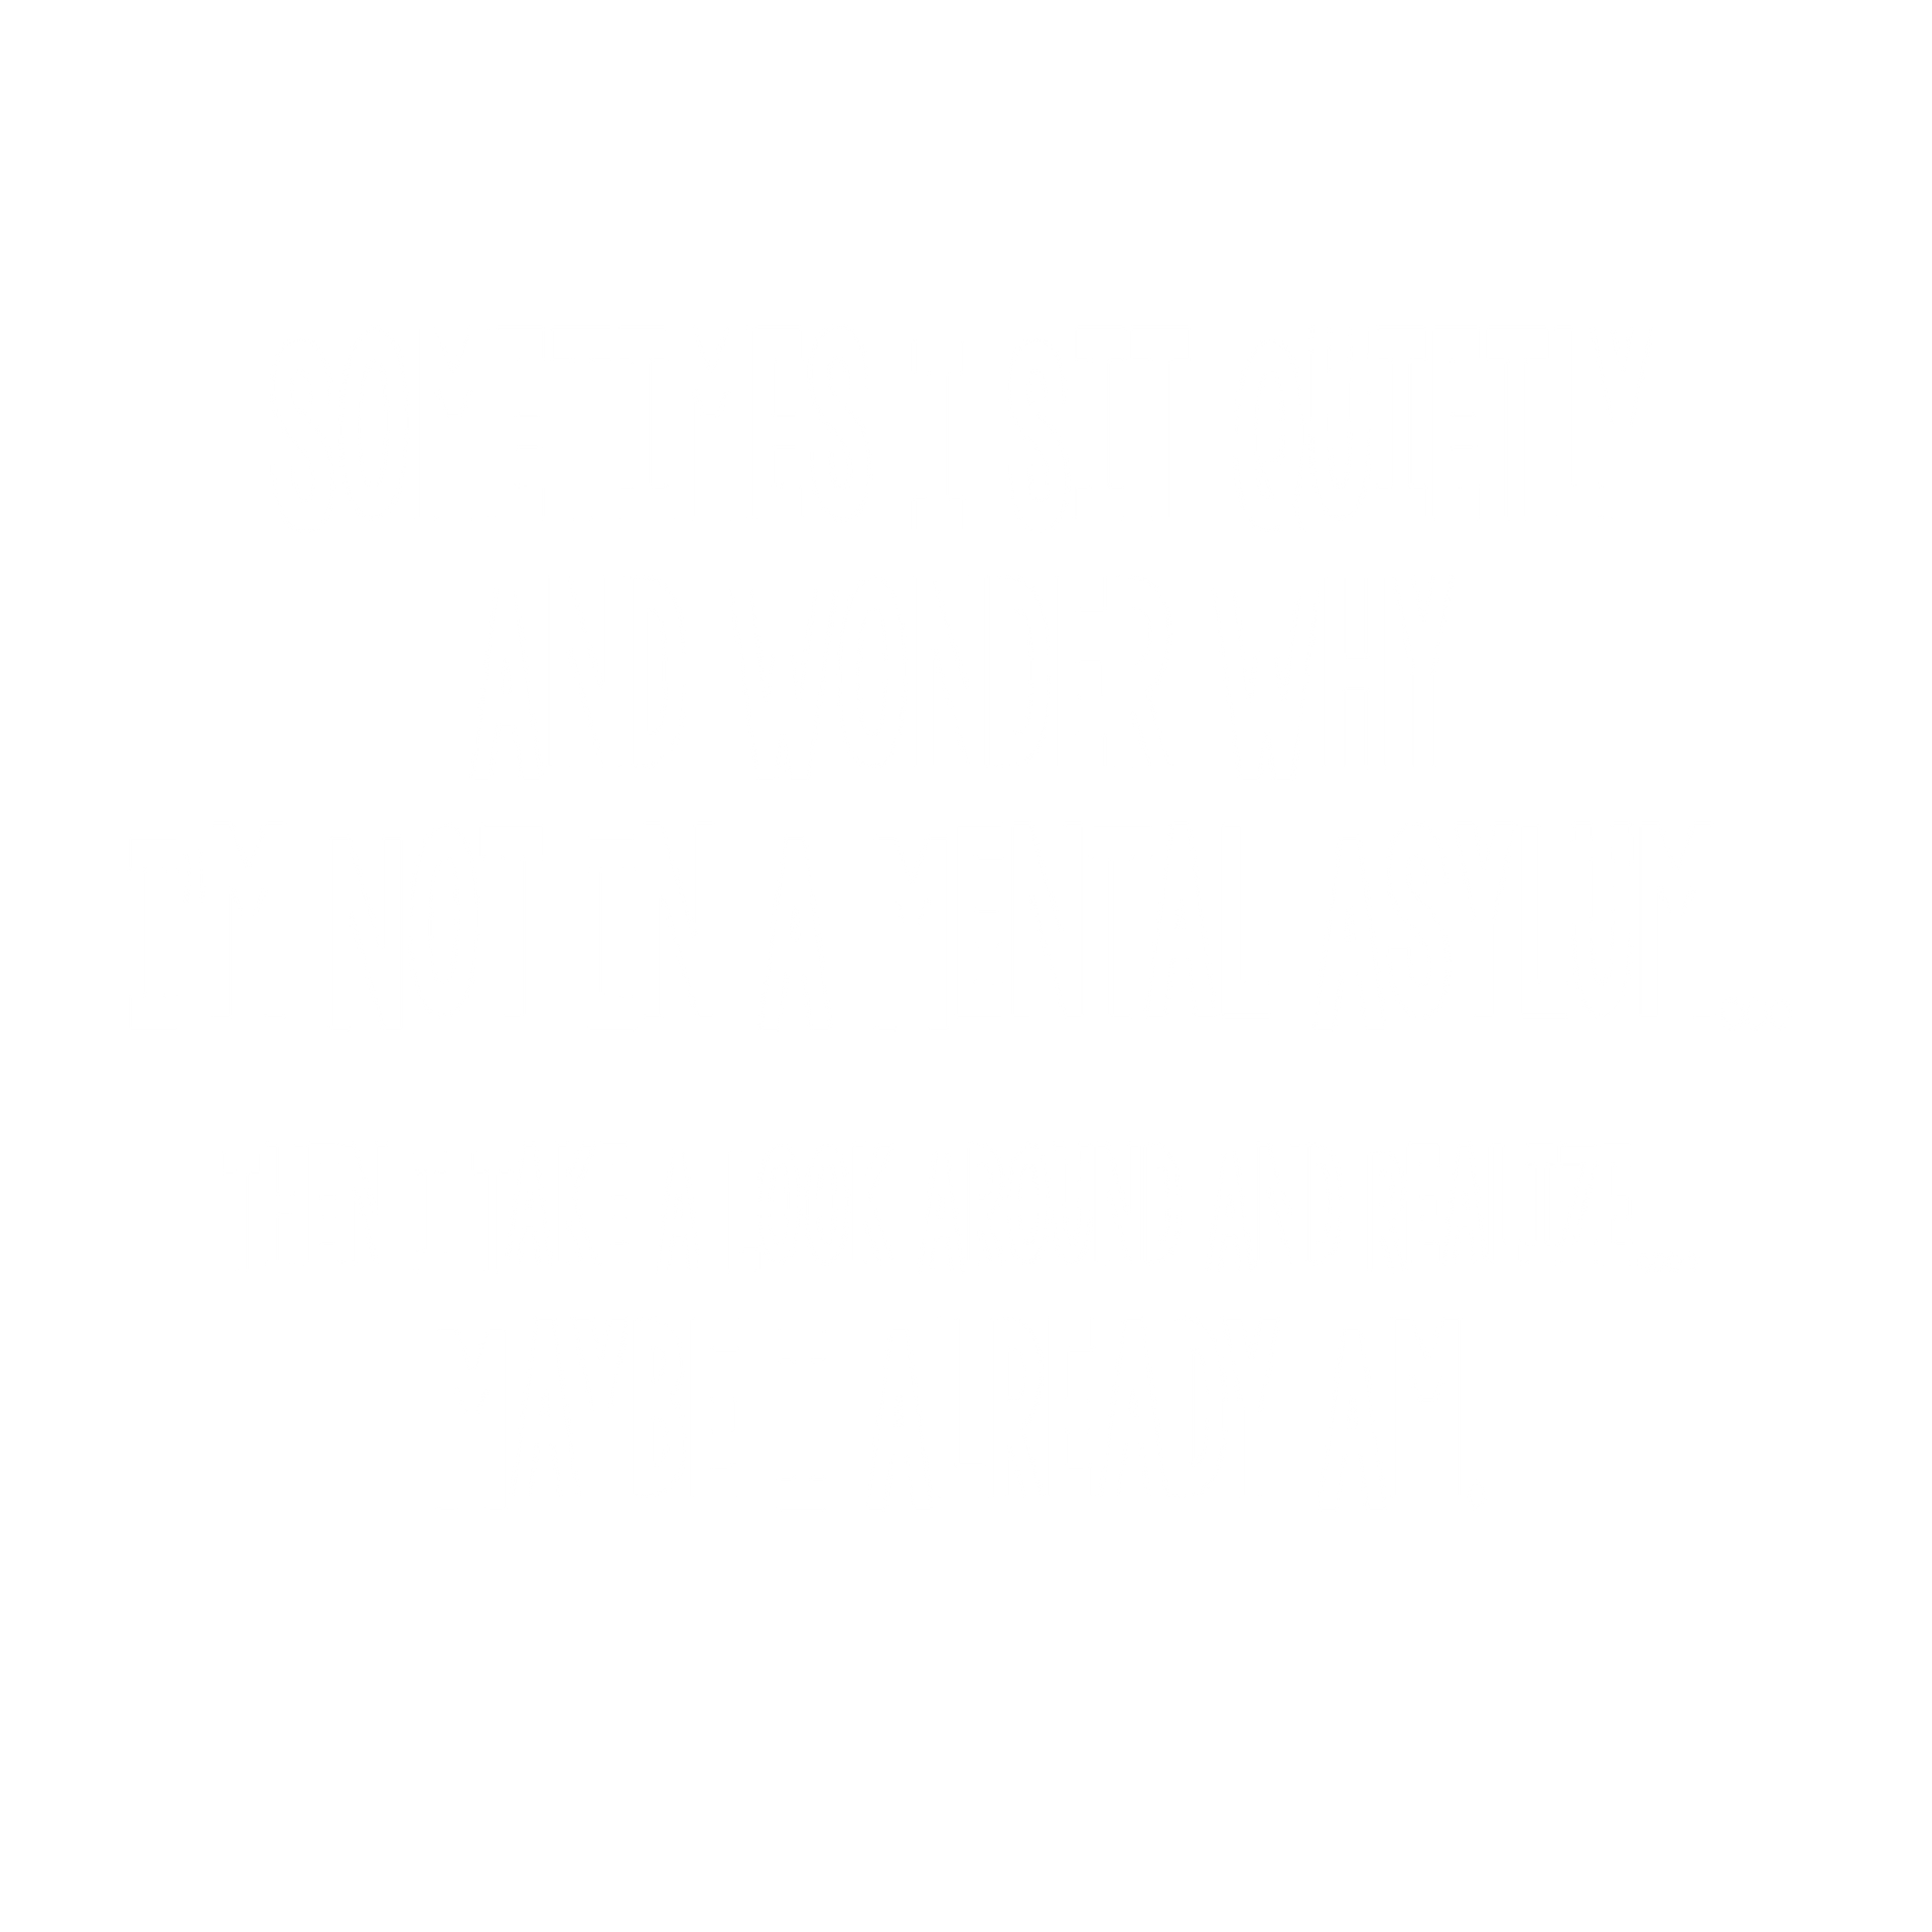 Funny T-Shirts design "Sometimes I Sit Quietly And Wonder Why I'm Not In A Mental Asylum"